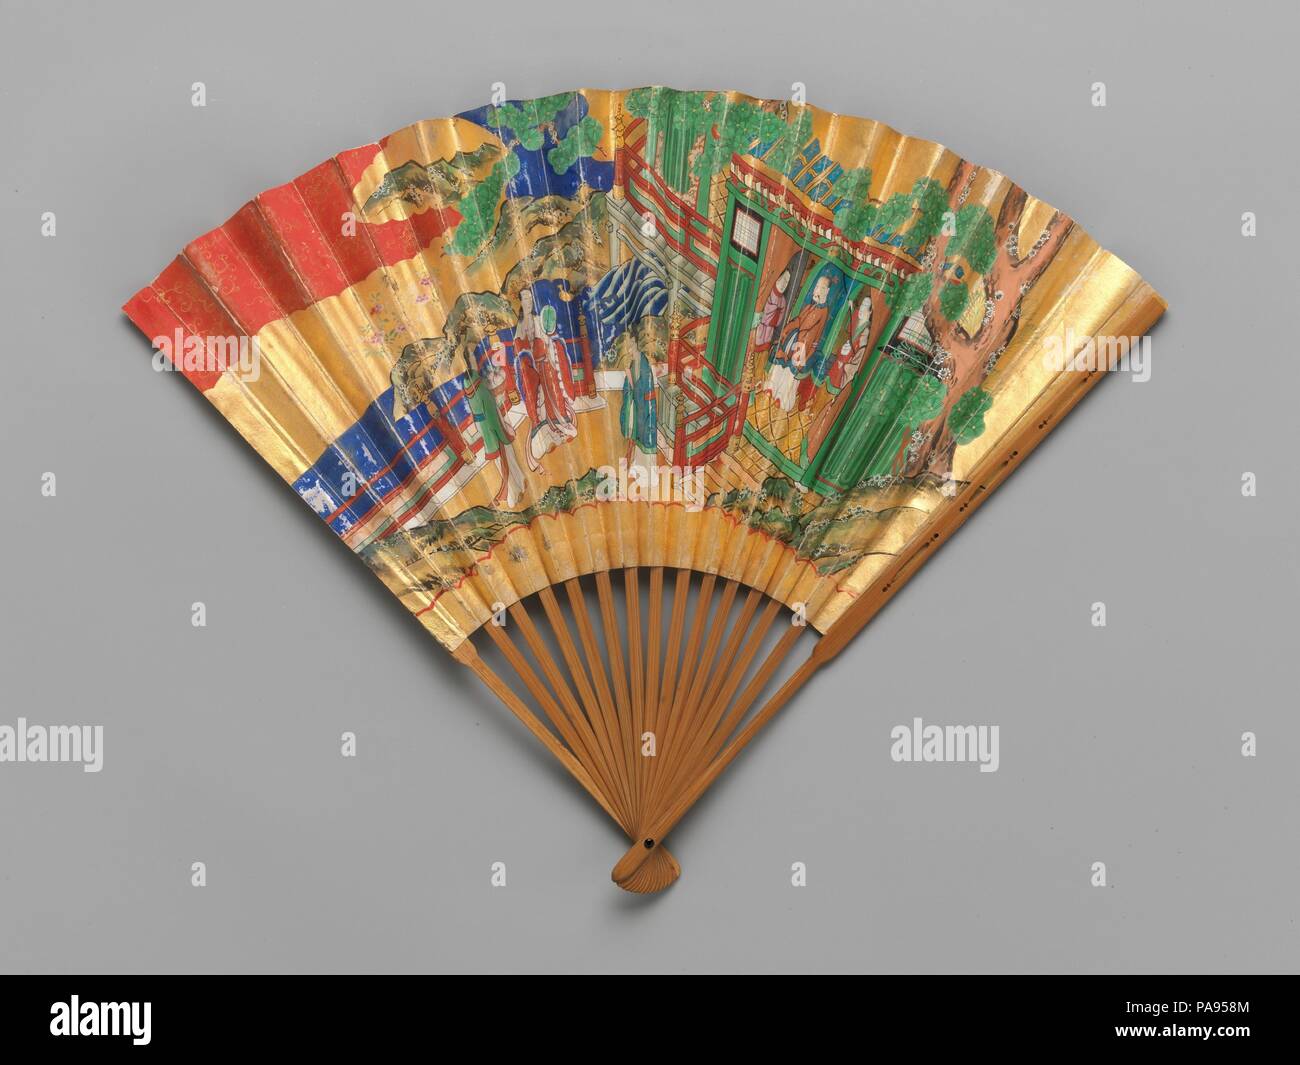 Chukei Fan. Culture: Japan. Dimensions: 13 1/4 × 19 in. (33.7 × 48.3 cm). Date: 19th century.  An important accessory of Noh actors is the chukei fan. In the refined and simplified performances, the fan plays an important role in delineating character. Differentiations in fans include the design, the colors of the ground and the color of the lacquer on the bamboo frame, depending on the particular role being performed. Each side of this fan has a different design, which is richly painted on gold-leafed paper. Cherry blossoms and pine are depicted on one side, and the Queen of the West and the  Stock Photo